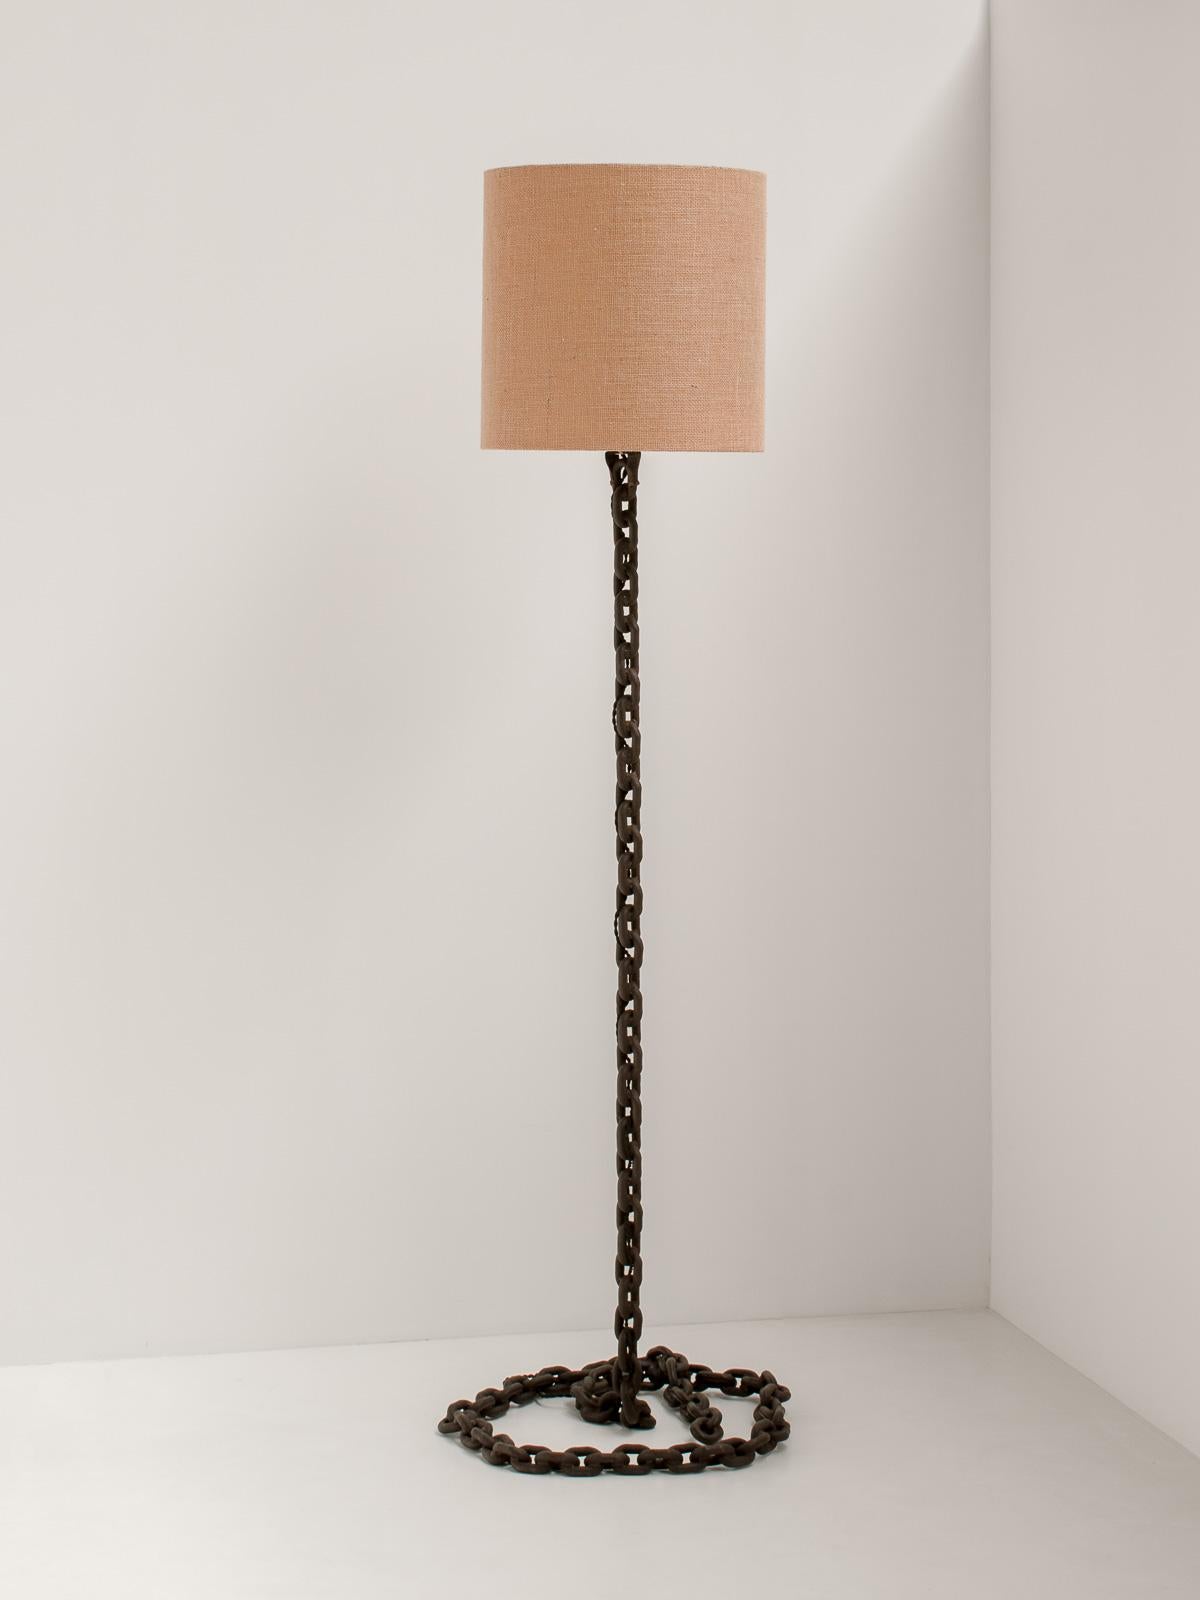 Late 20th Century Large Chain Link Floor Lamp in the style of Franz West, France, 1970s